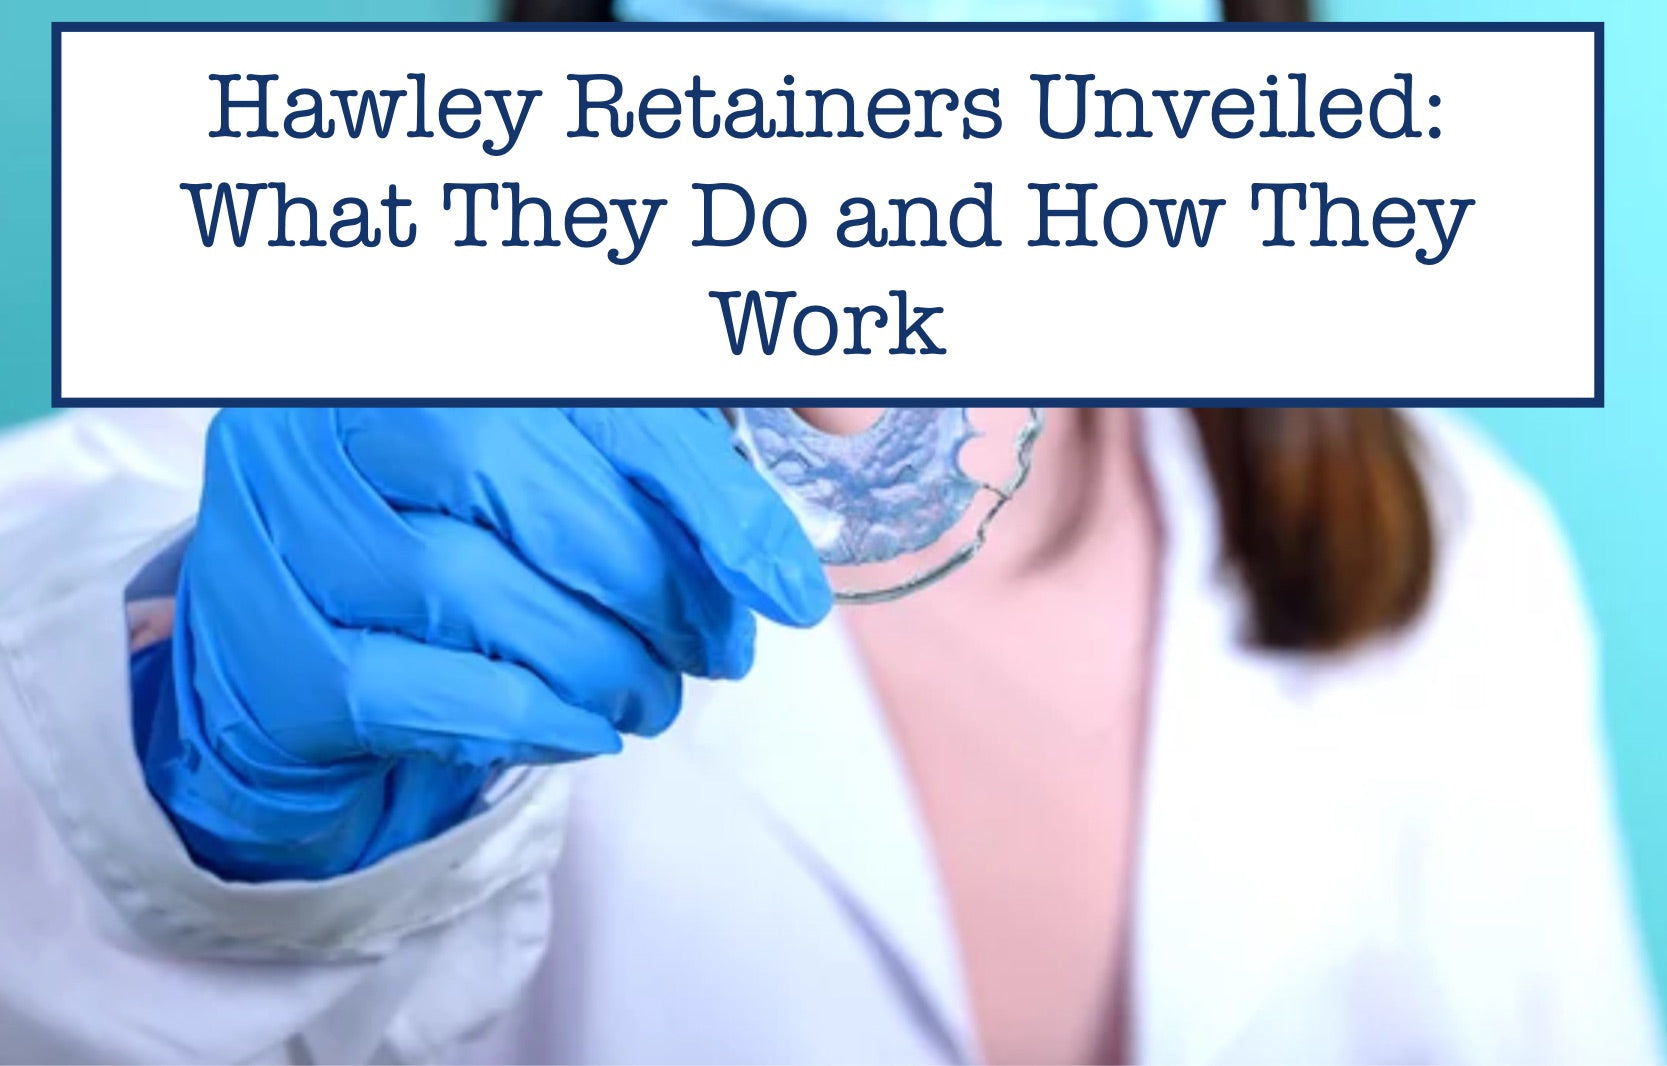 Hawley Retainers Unveiled: What They Do and How They Work